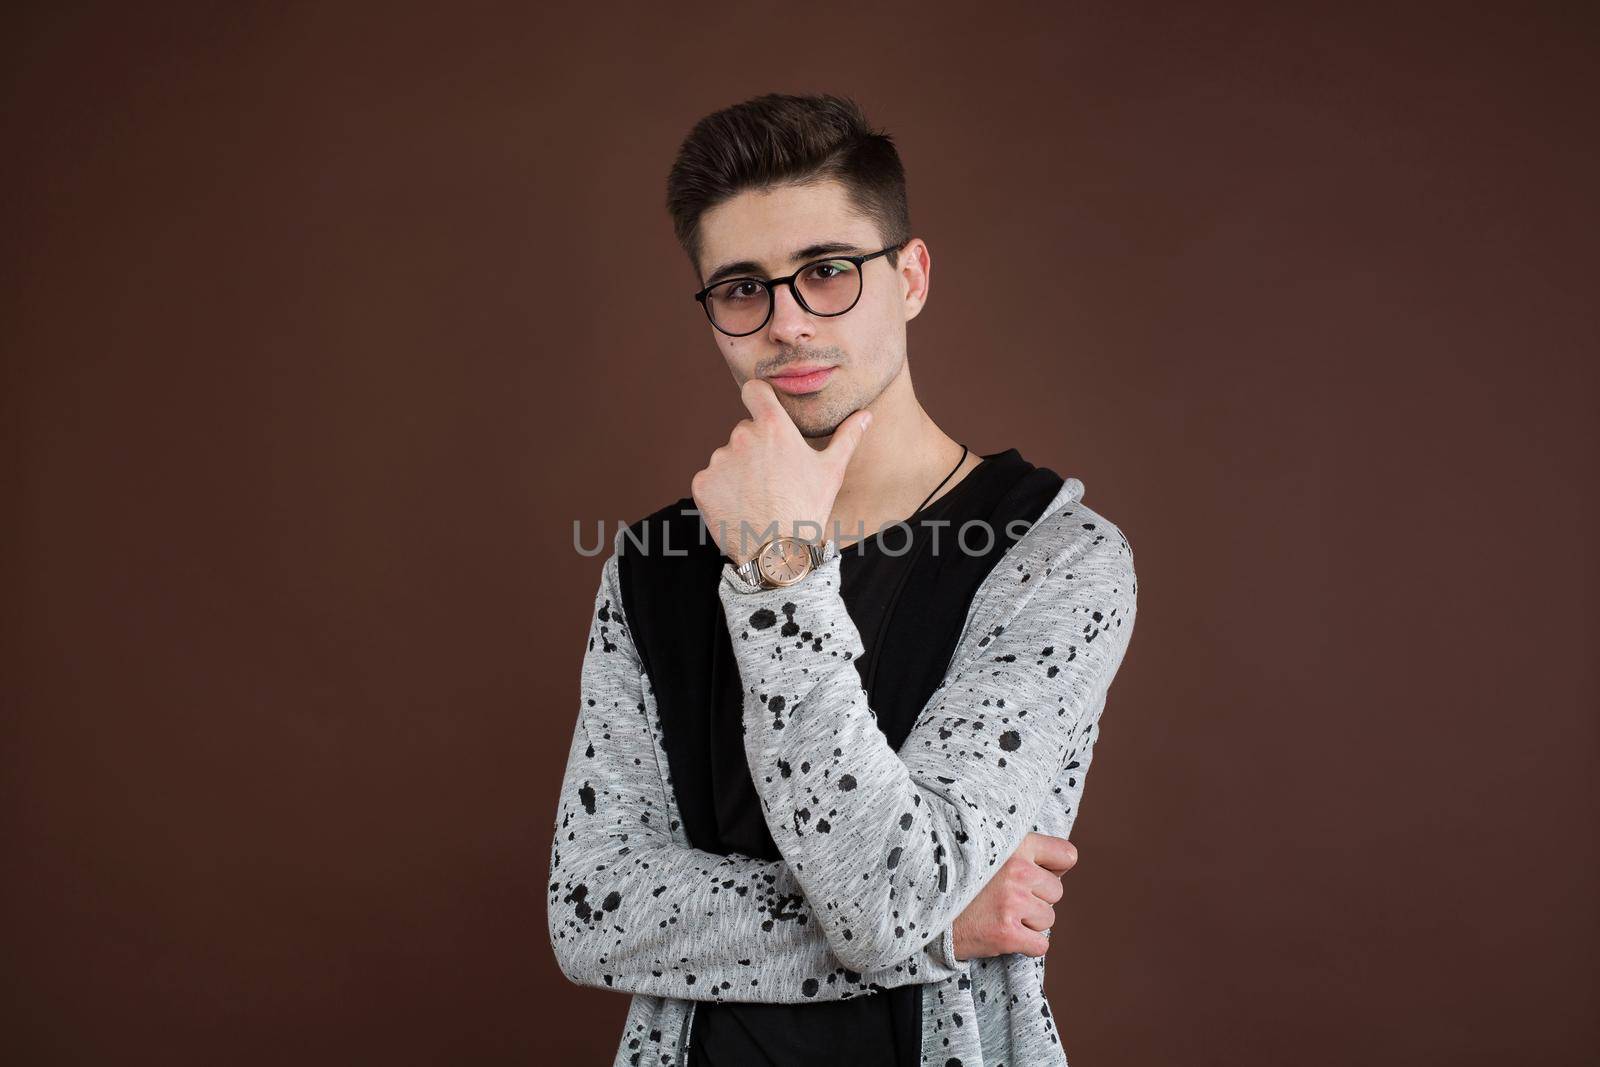 Young man in depression. Stylish male student wears round spectacles, has trendy hairstyle, looks confidently, isolated over brown background. People and human expressions. by StudioPeace